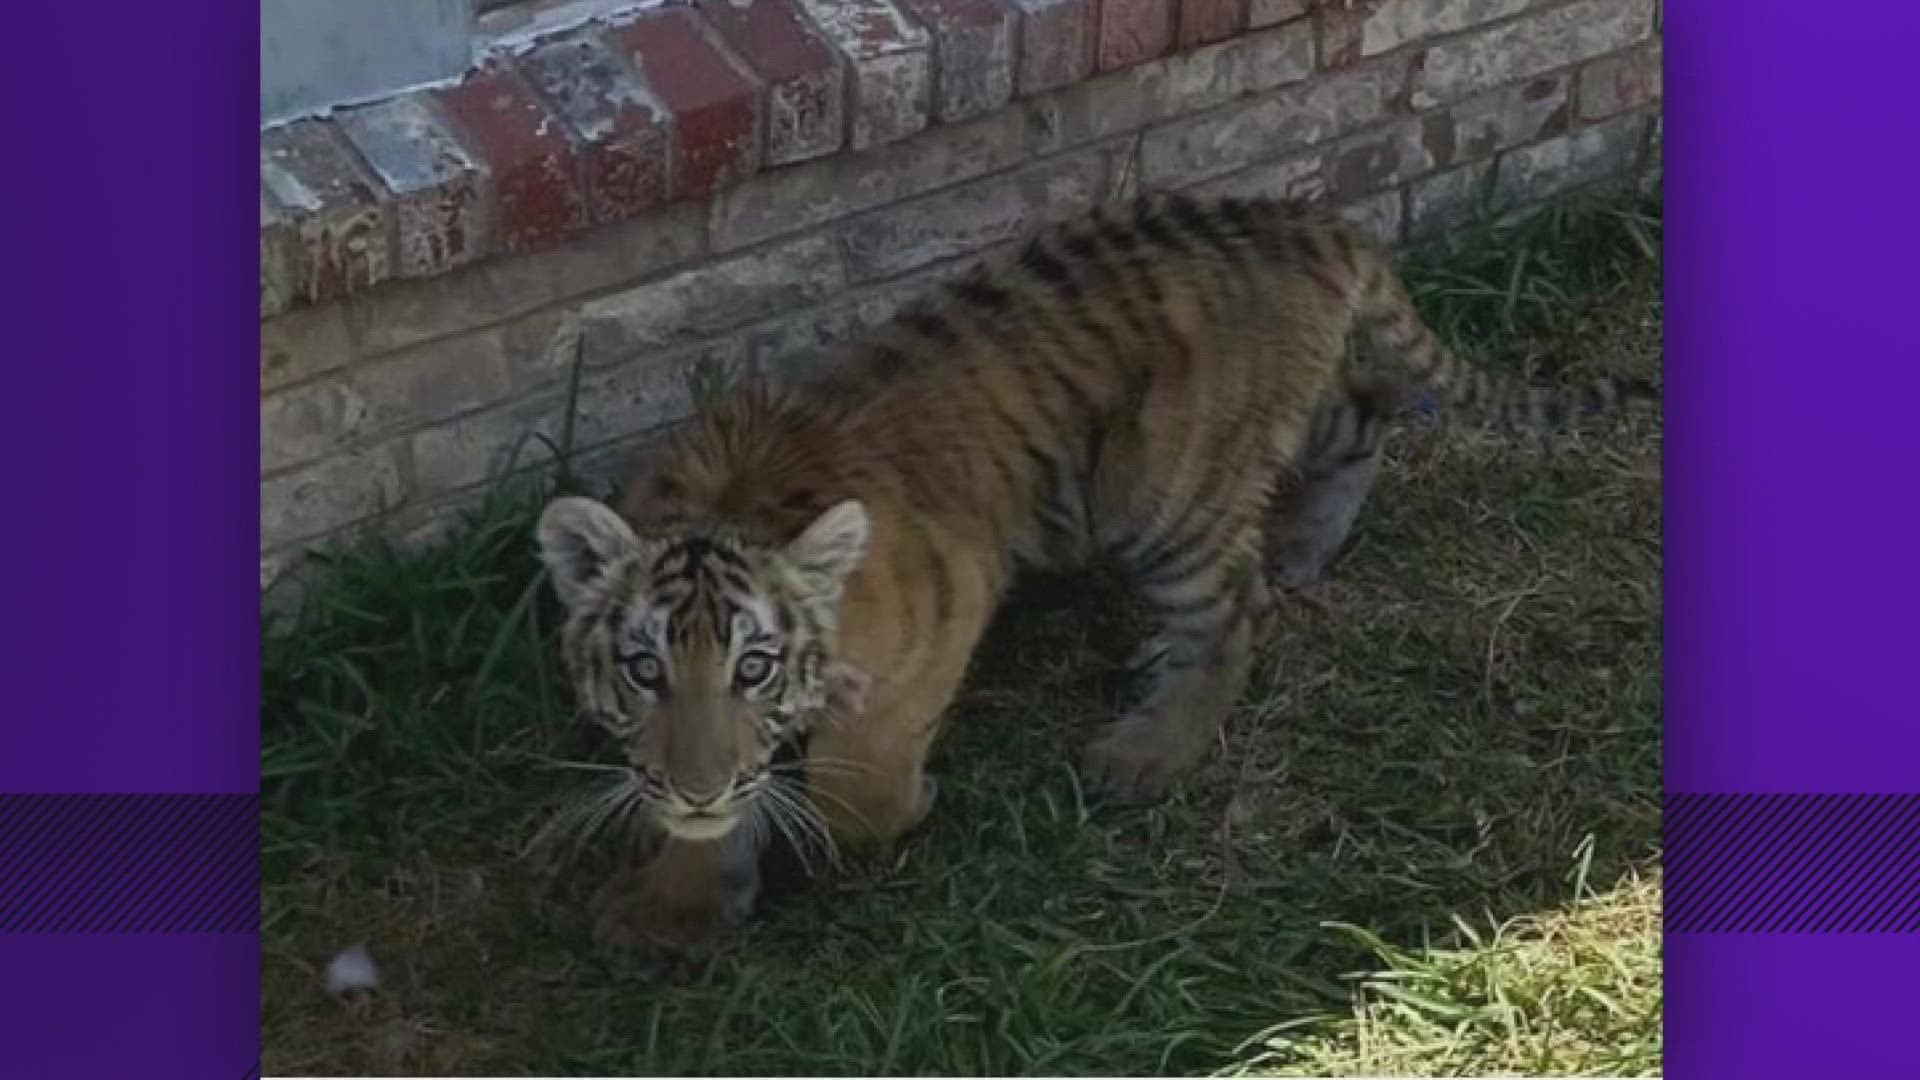 The tiger cub was caged during the process and was not loose, as some social media rumors claimed. Trapboy Freddy was taken into custody on weapons charges.